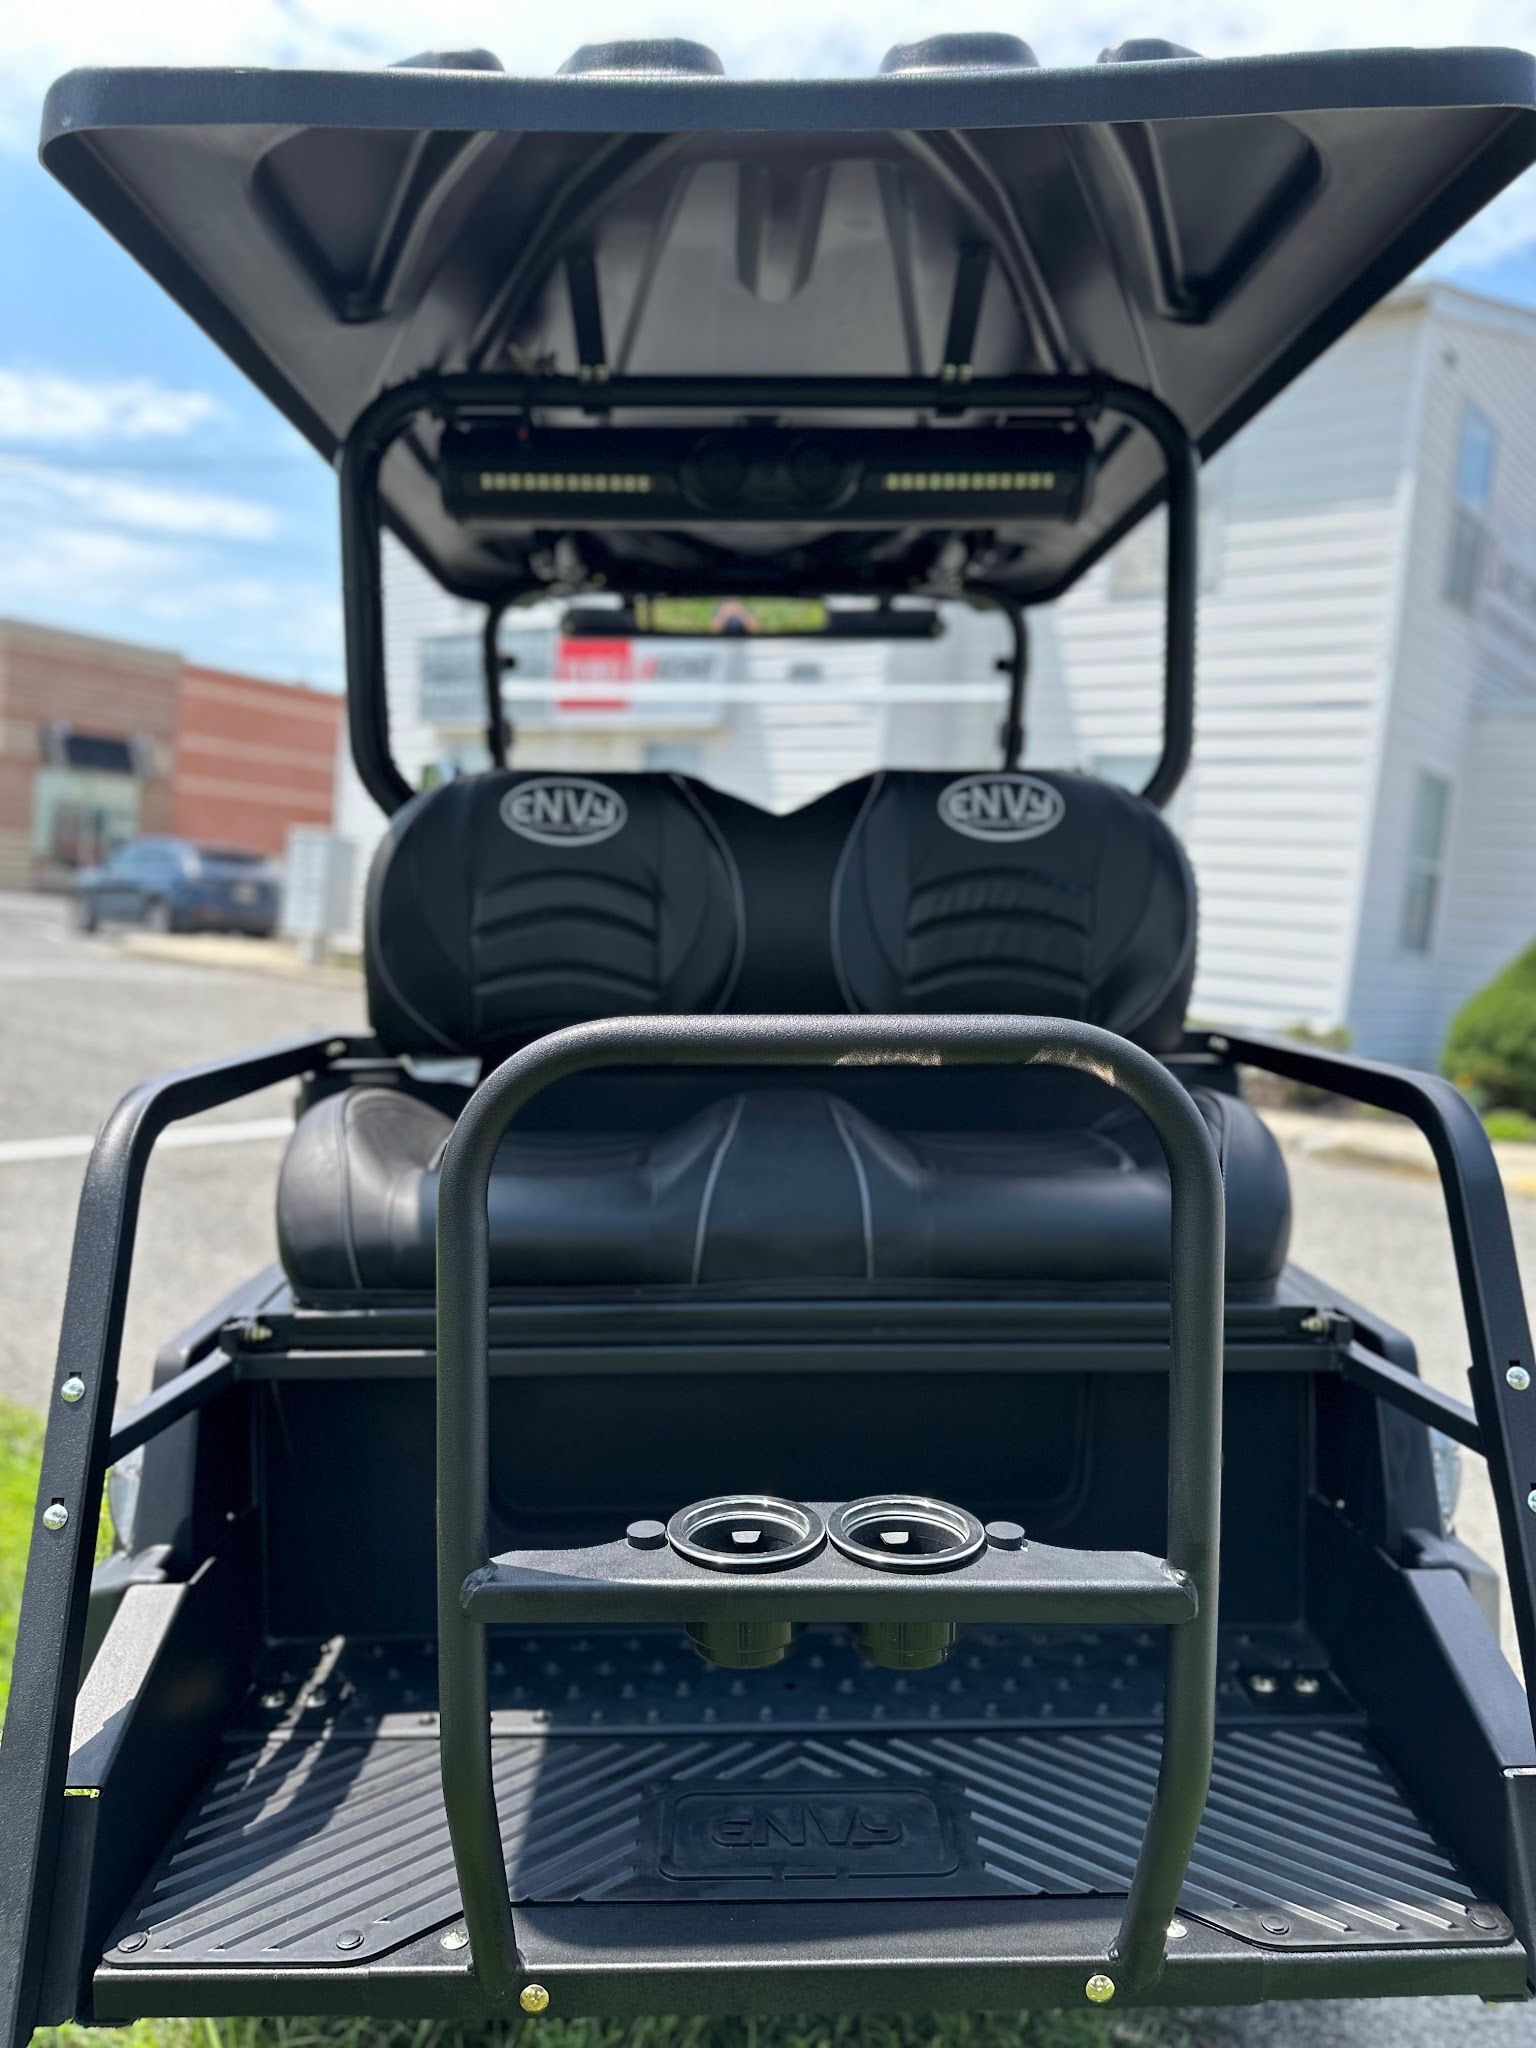 Services & Products DMV Golf Carts in Waldorf MD